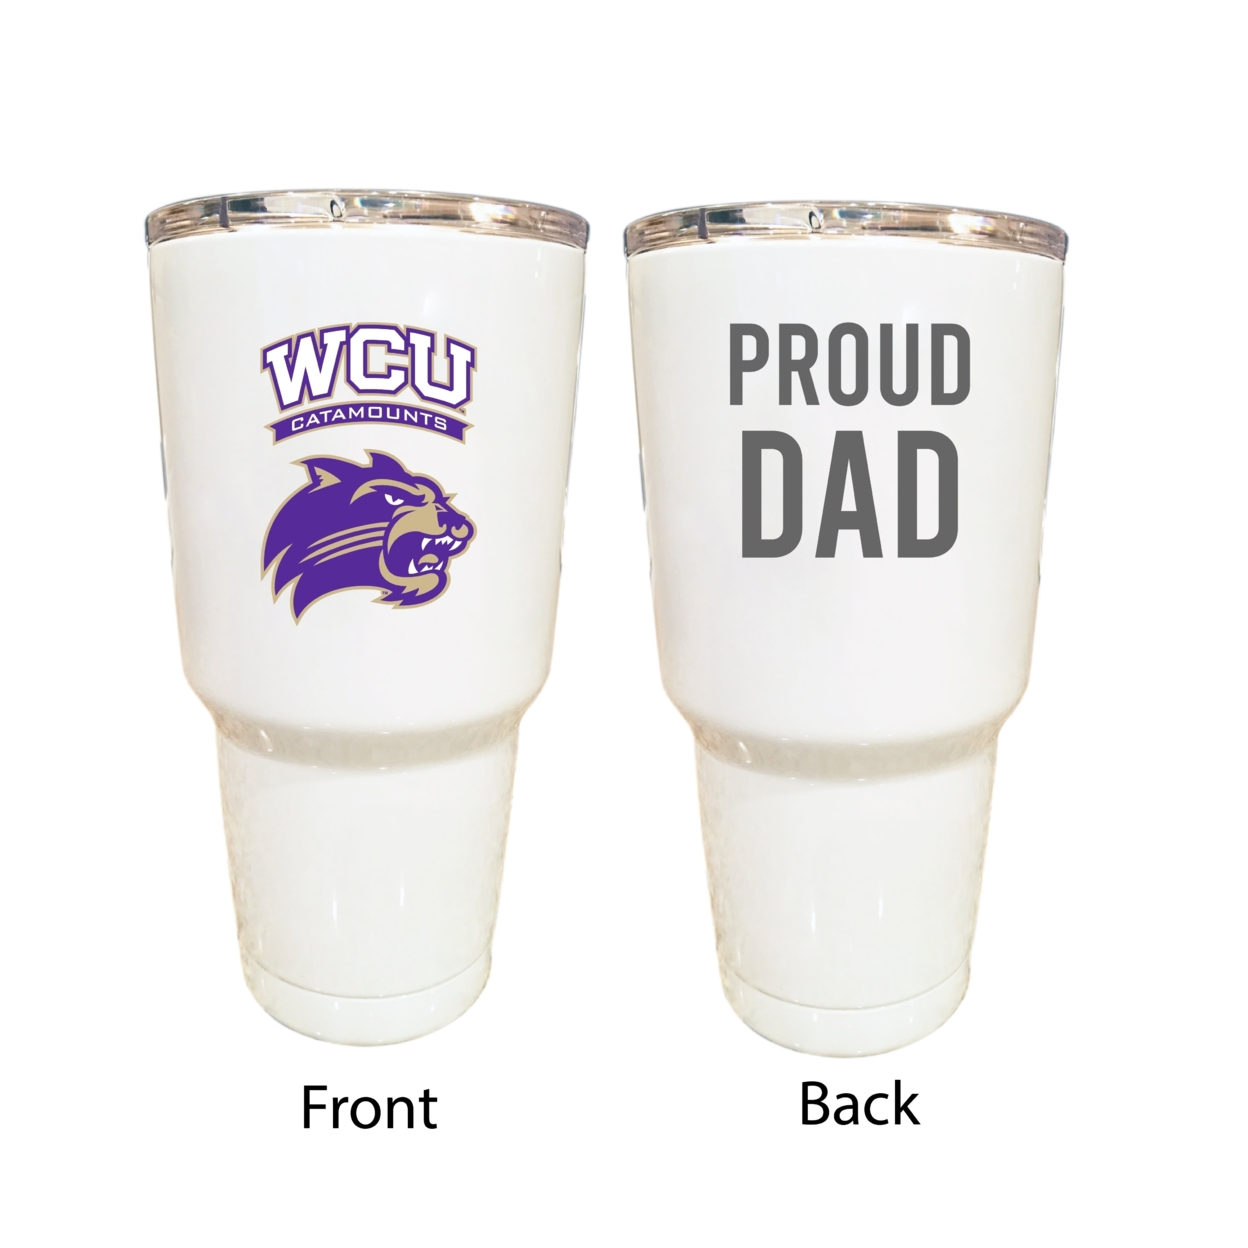 Western Carolina University Proud Dad 24 Oz Insulated Stainless Steel Tumblers Choose Your Color. - White